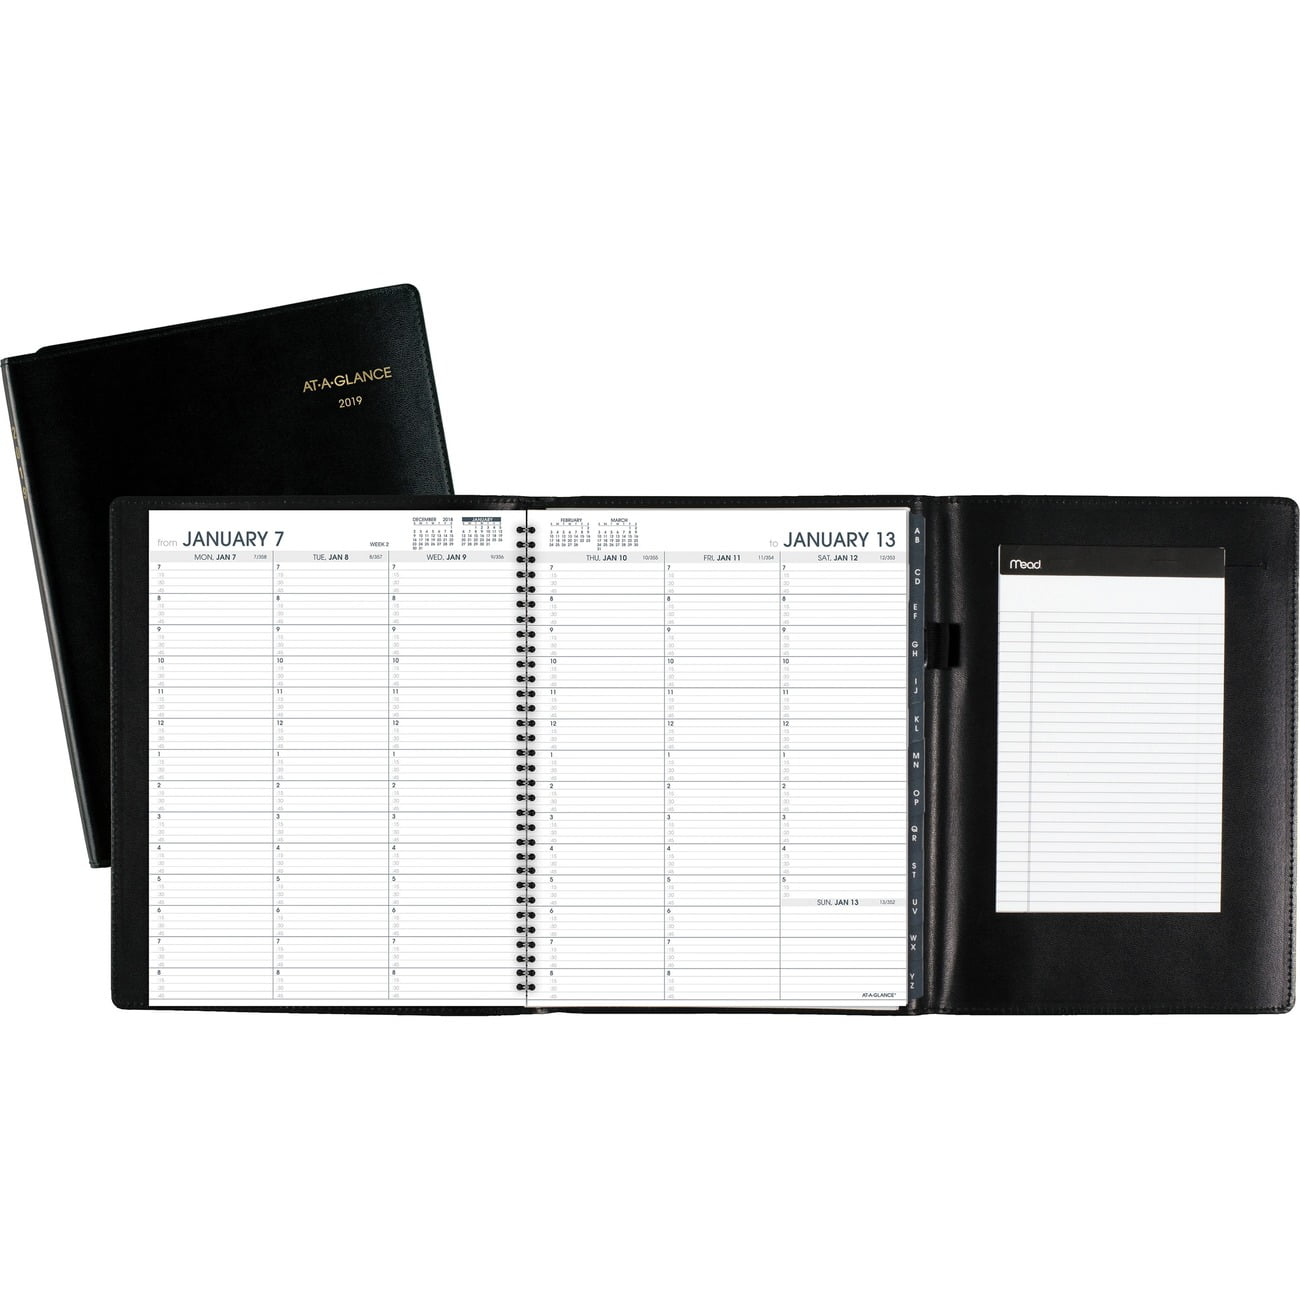 At-A-Glance Appointment Book Plus Weekly Appointment Book (70-950p-05 ...